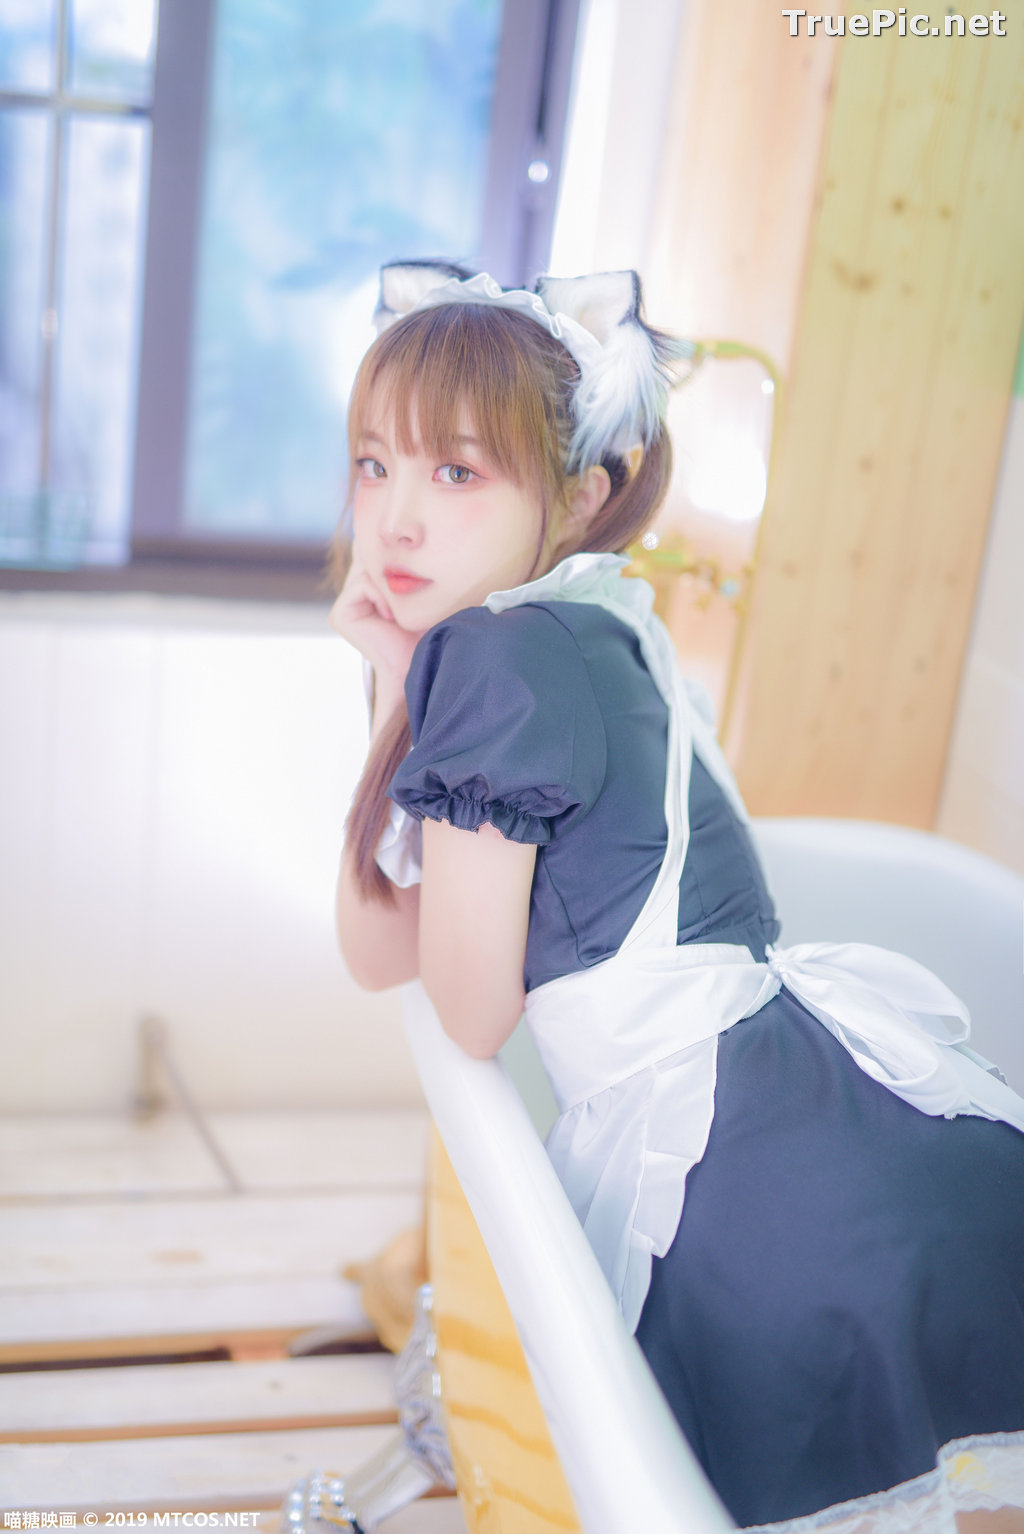 Image [MTCos] 喵糖映画 Vol.049 - Chinese Cute Model - Lovely Maid Cat - TruePic.net - Picture-38